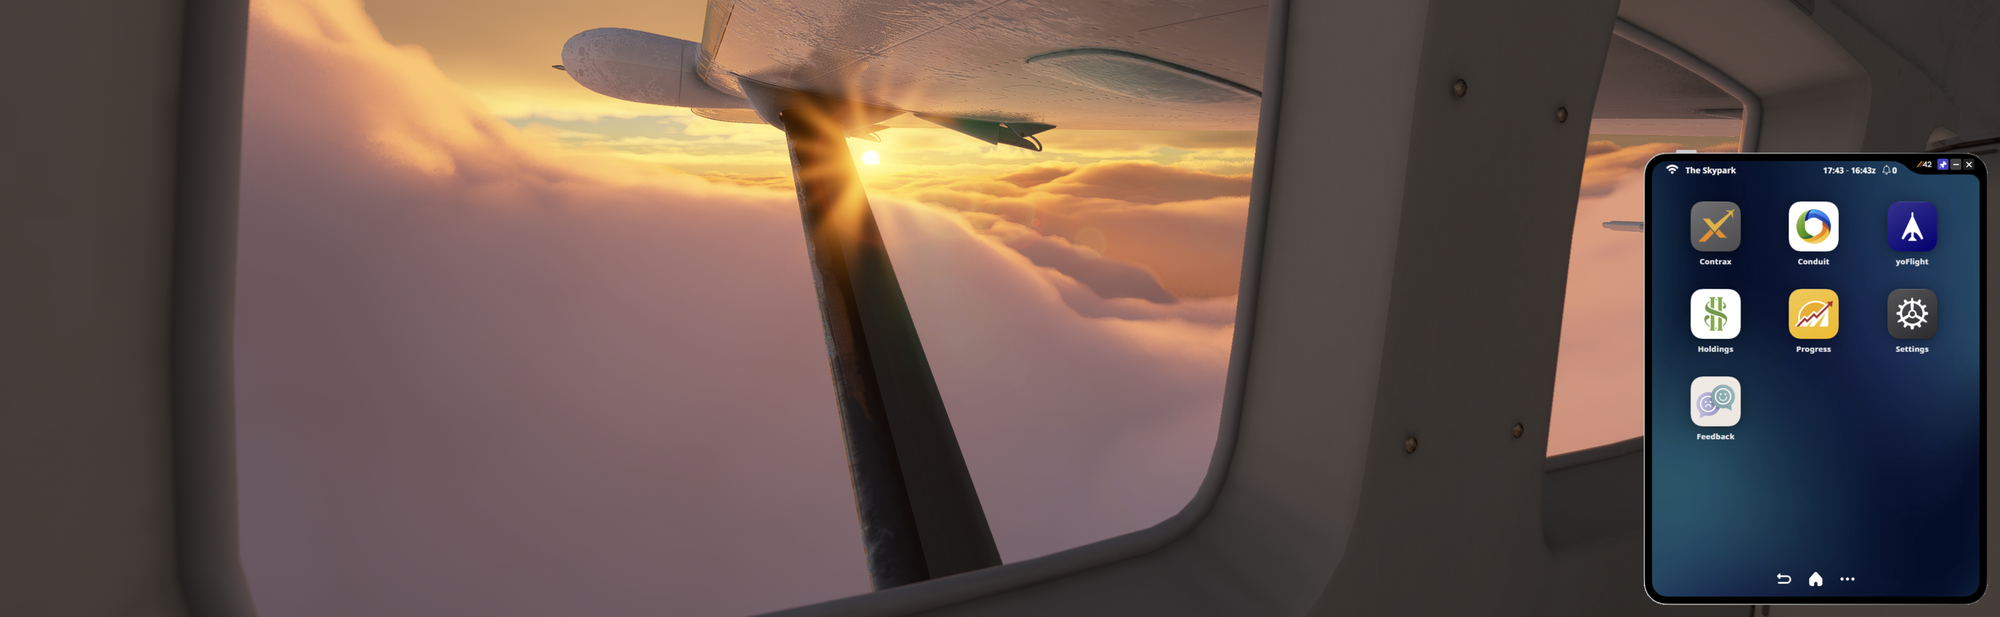 The Skypark for Microsoft Flight Simulator – in-depth review of a novel approach